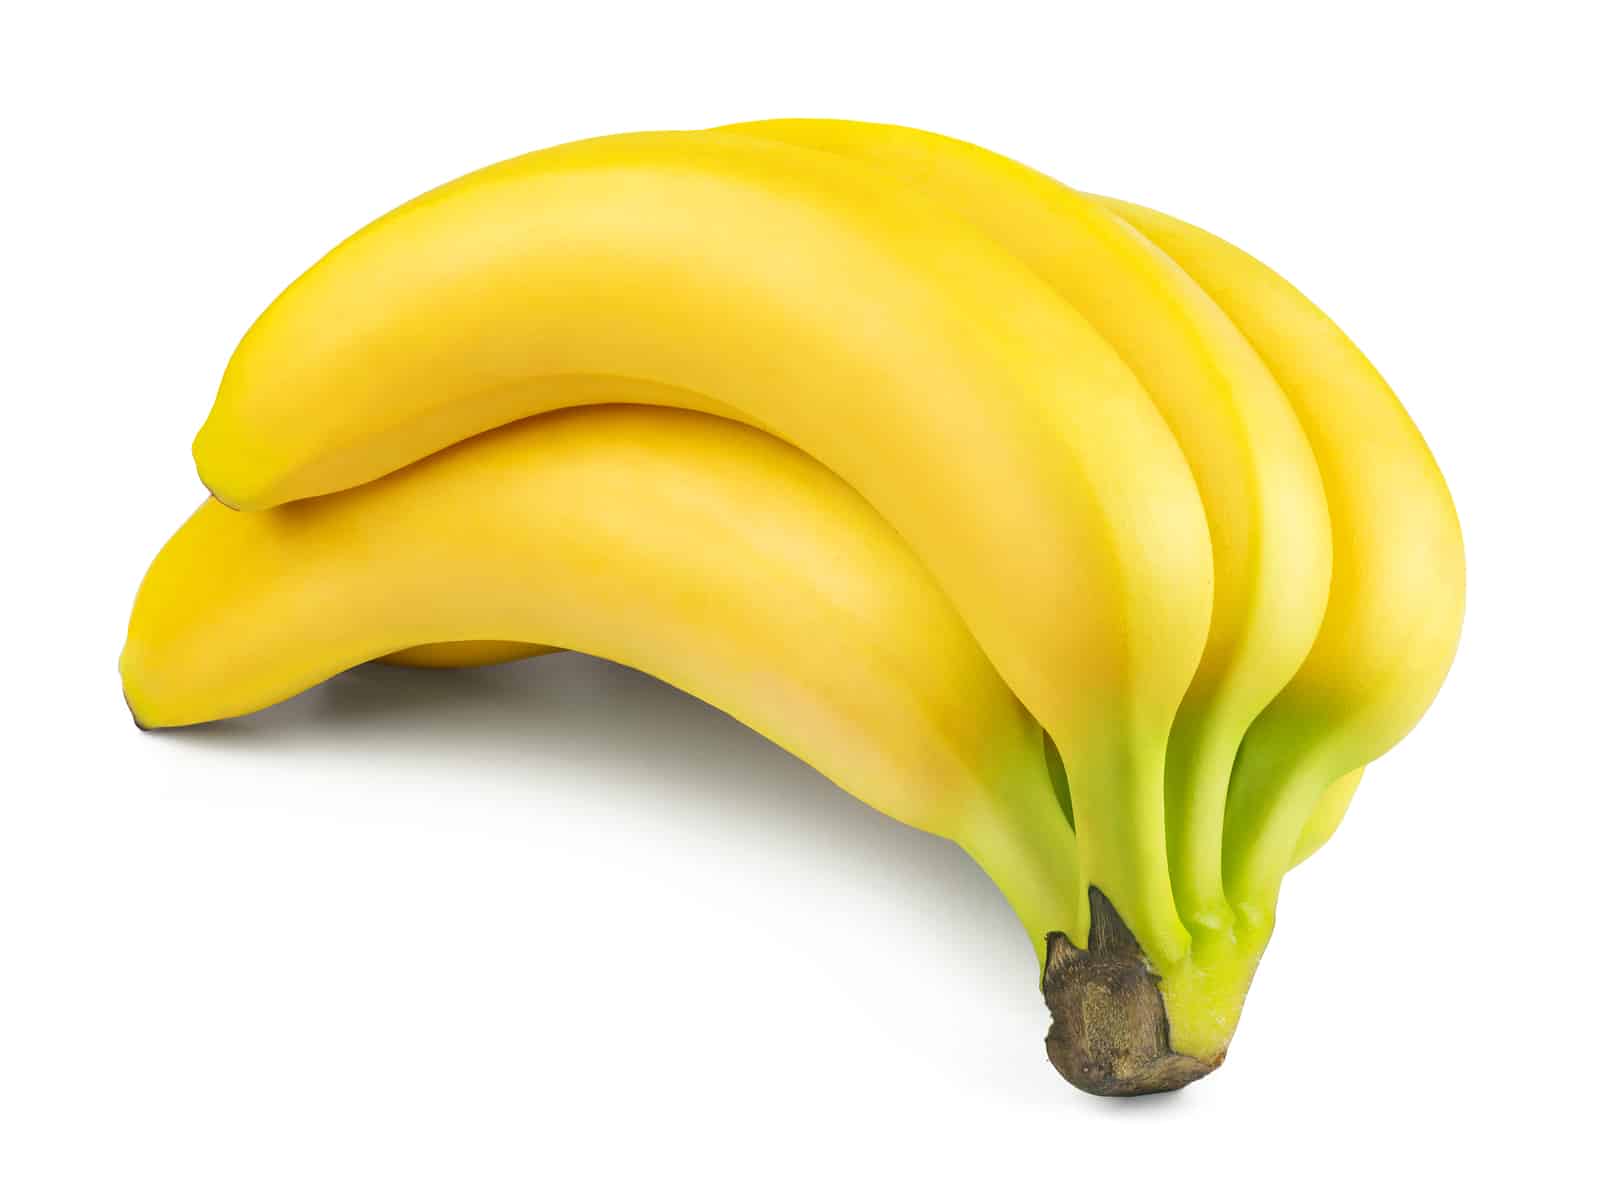 How Many Calories Is In A Banana? 2